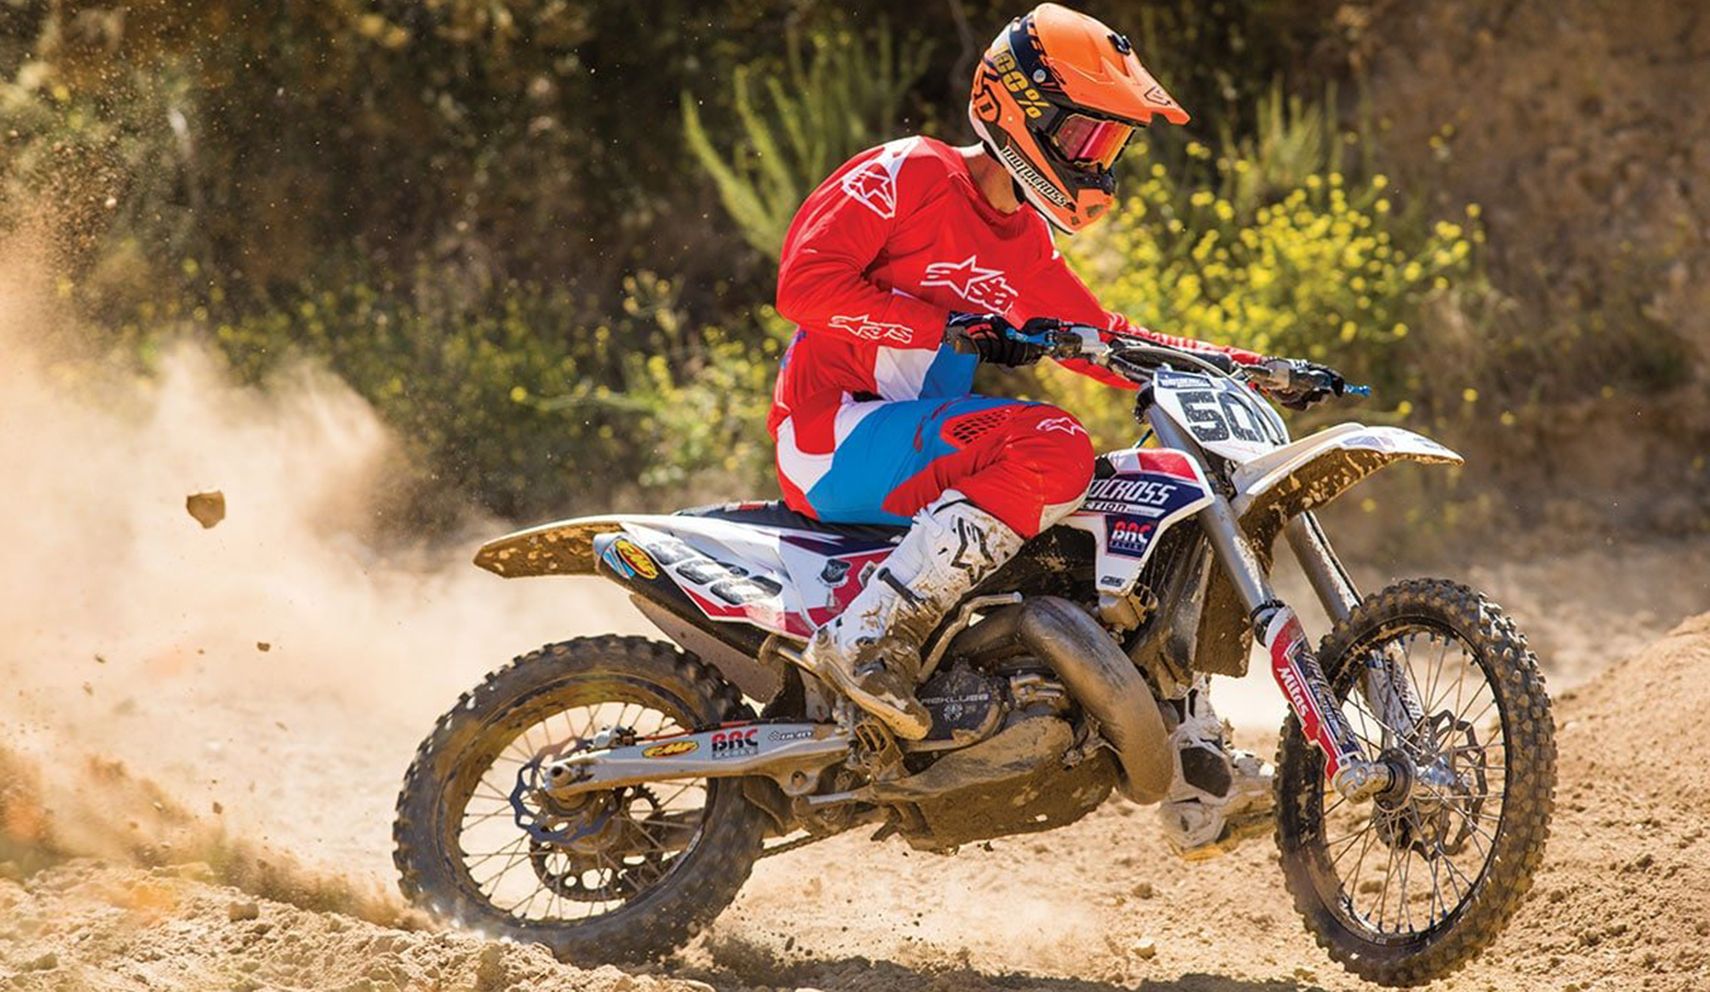 The Japanese Motocross Makers Began To Put Pressure On The AMA To Stop The 500cc Class